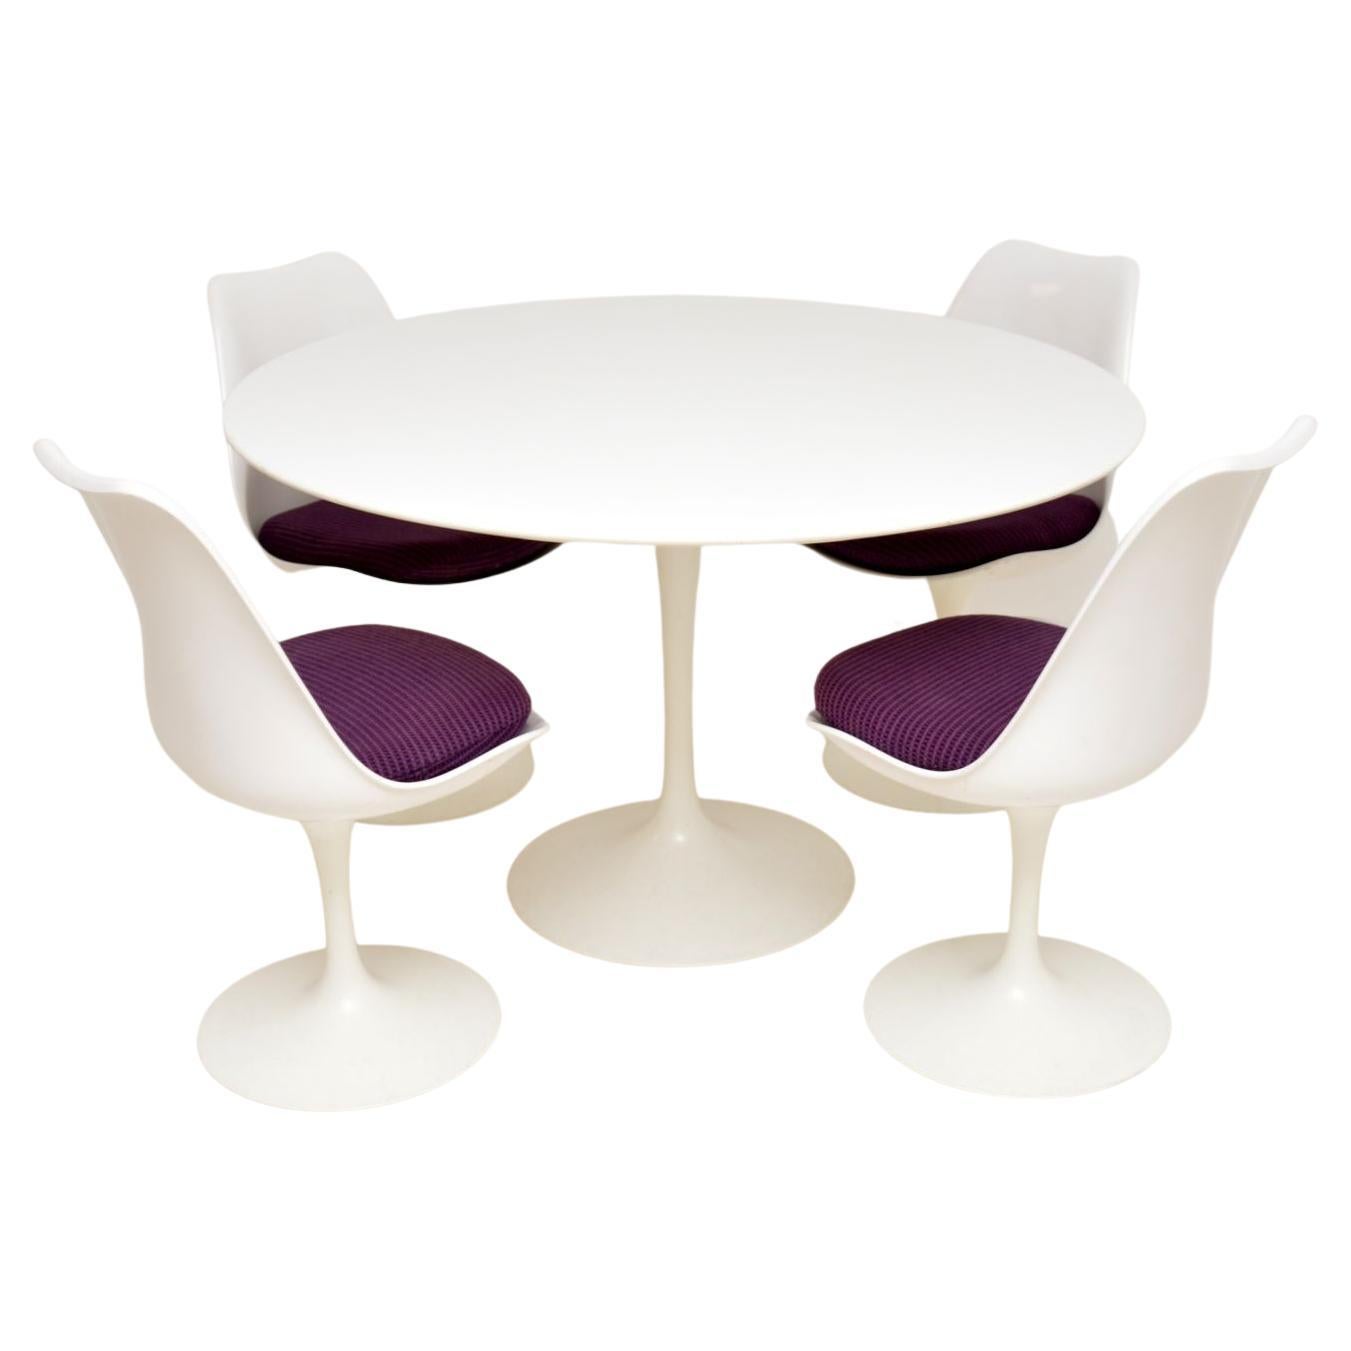 Eero Saarinen for Knoll Tulip Dining Table & Chairs For Sale